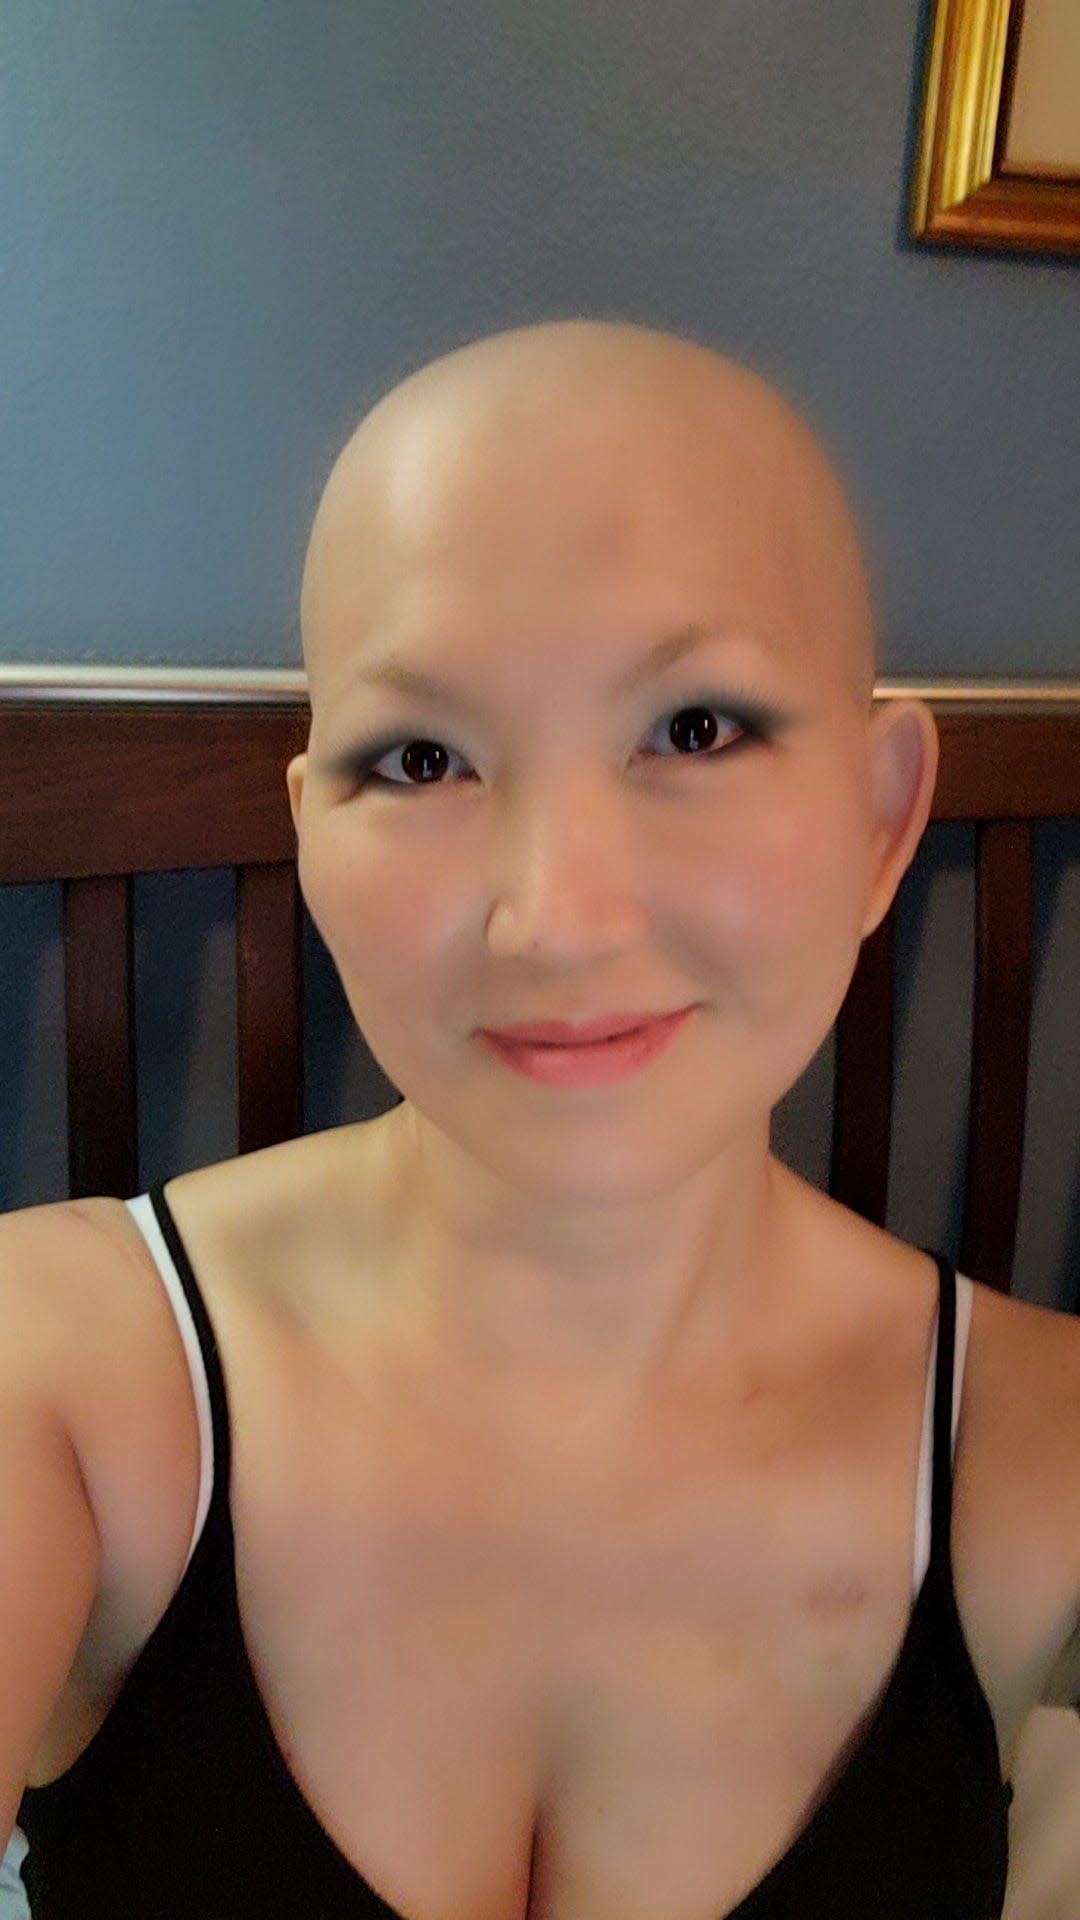 'Black Widow' Jeanette Lee one year after Stage 4 cancer diagnosis: 'Fight the good fight'